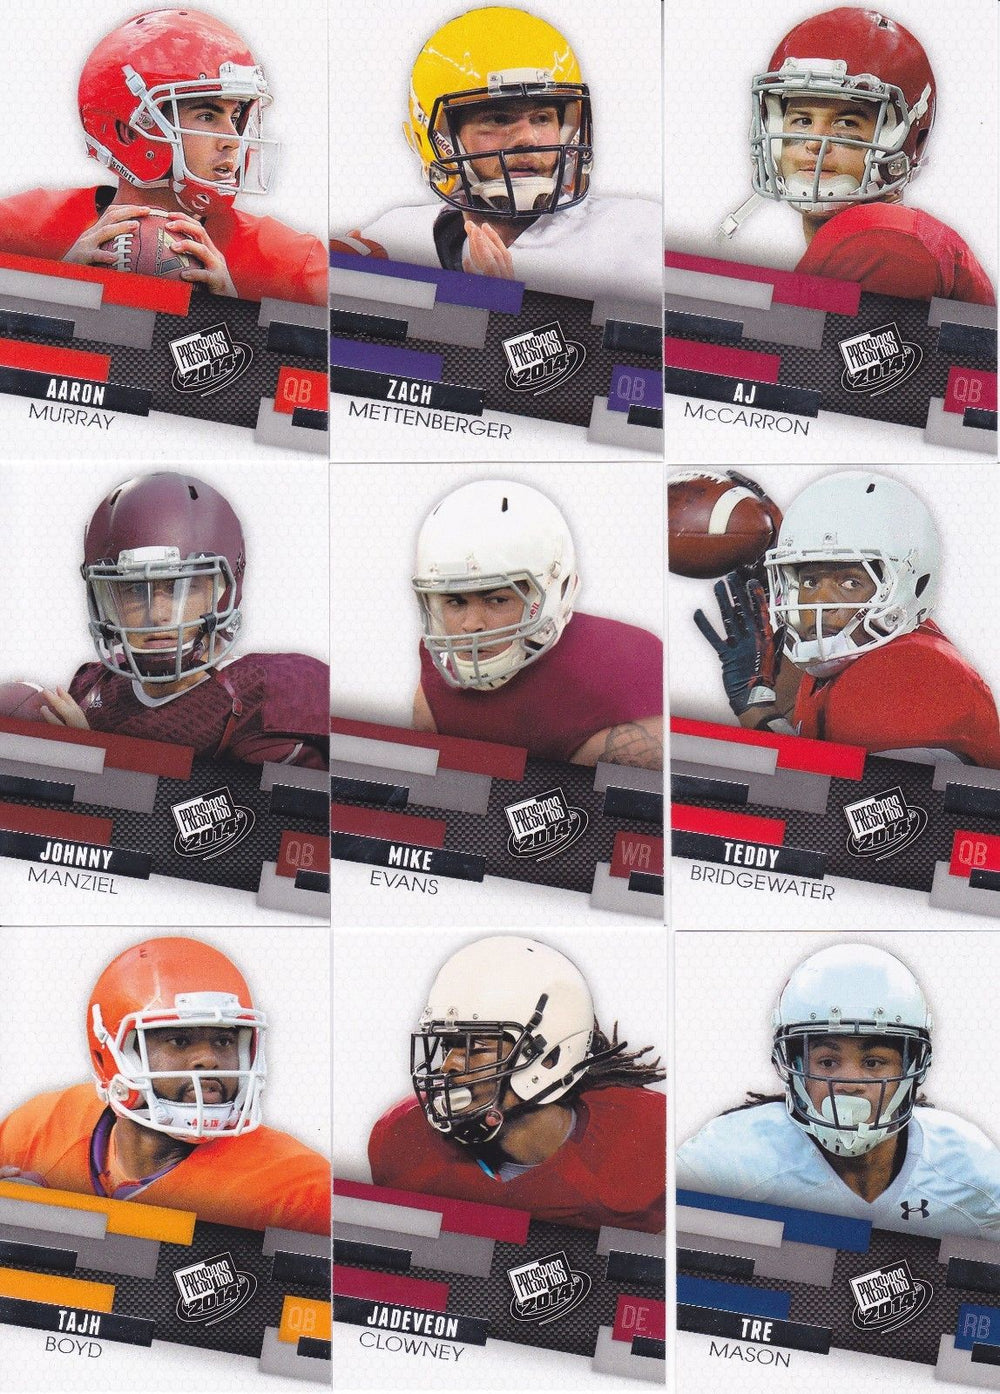 2014 Press Pass Football Series Set Loaded with Top Draft Picks including Johnny Manziel and Odell Beckham Jr. Plus